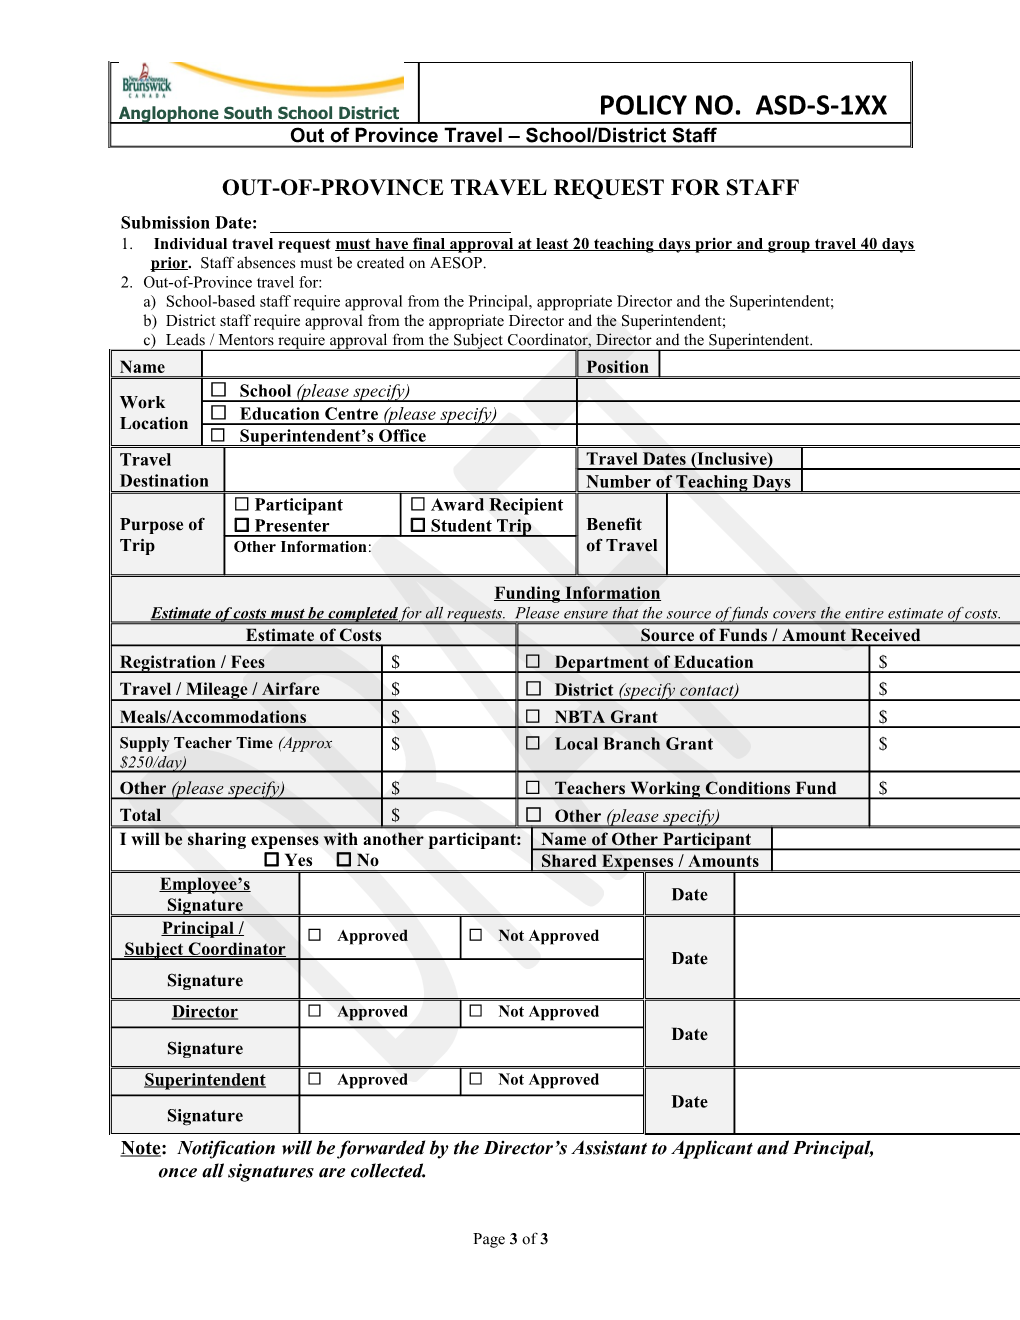 All Out-Of-Province Travel Must Be Conducted in Accordance with the Travel Directive AD-2801